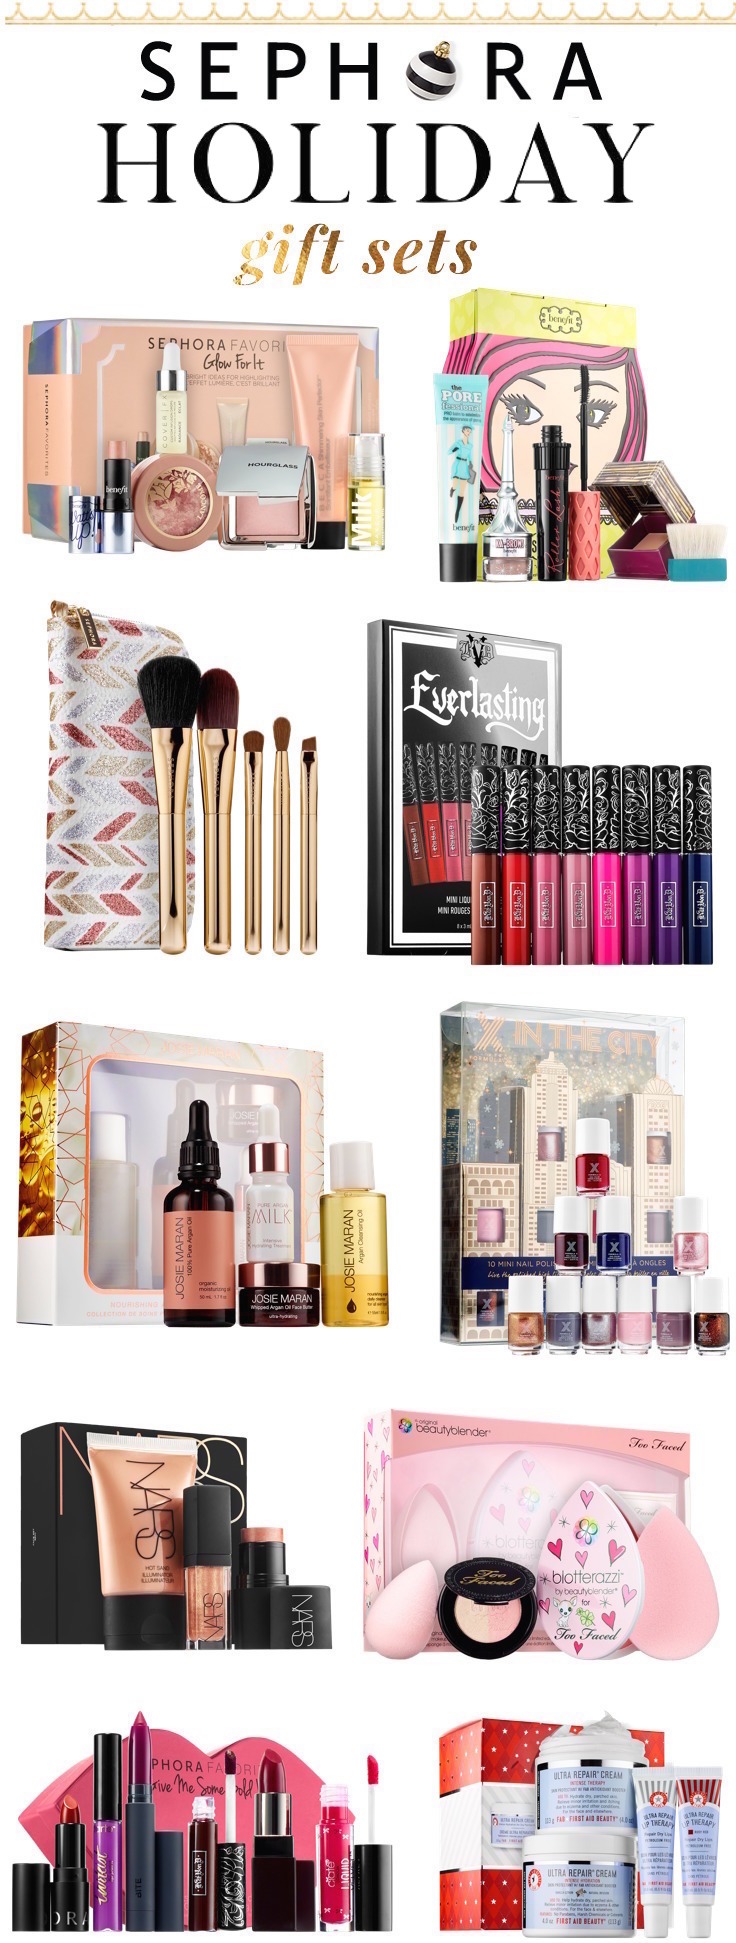 The must-have holiday'16 beauty gifts under $50 at Sephora! Click through to see the full list!